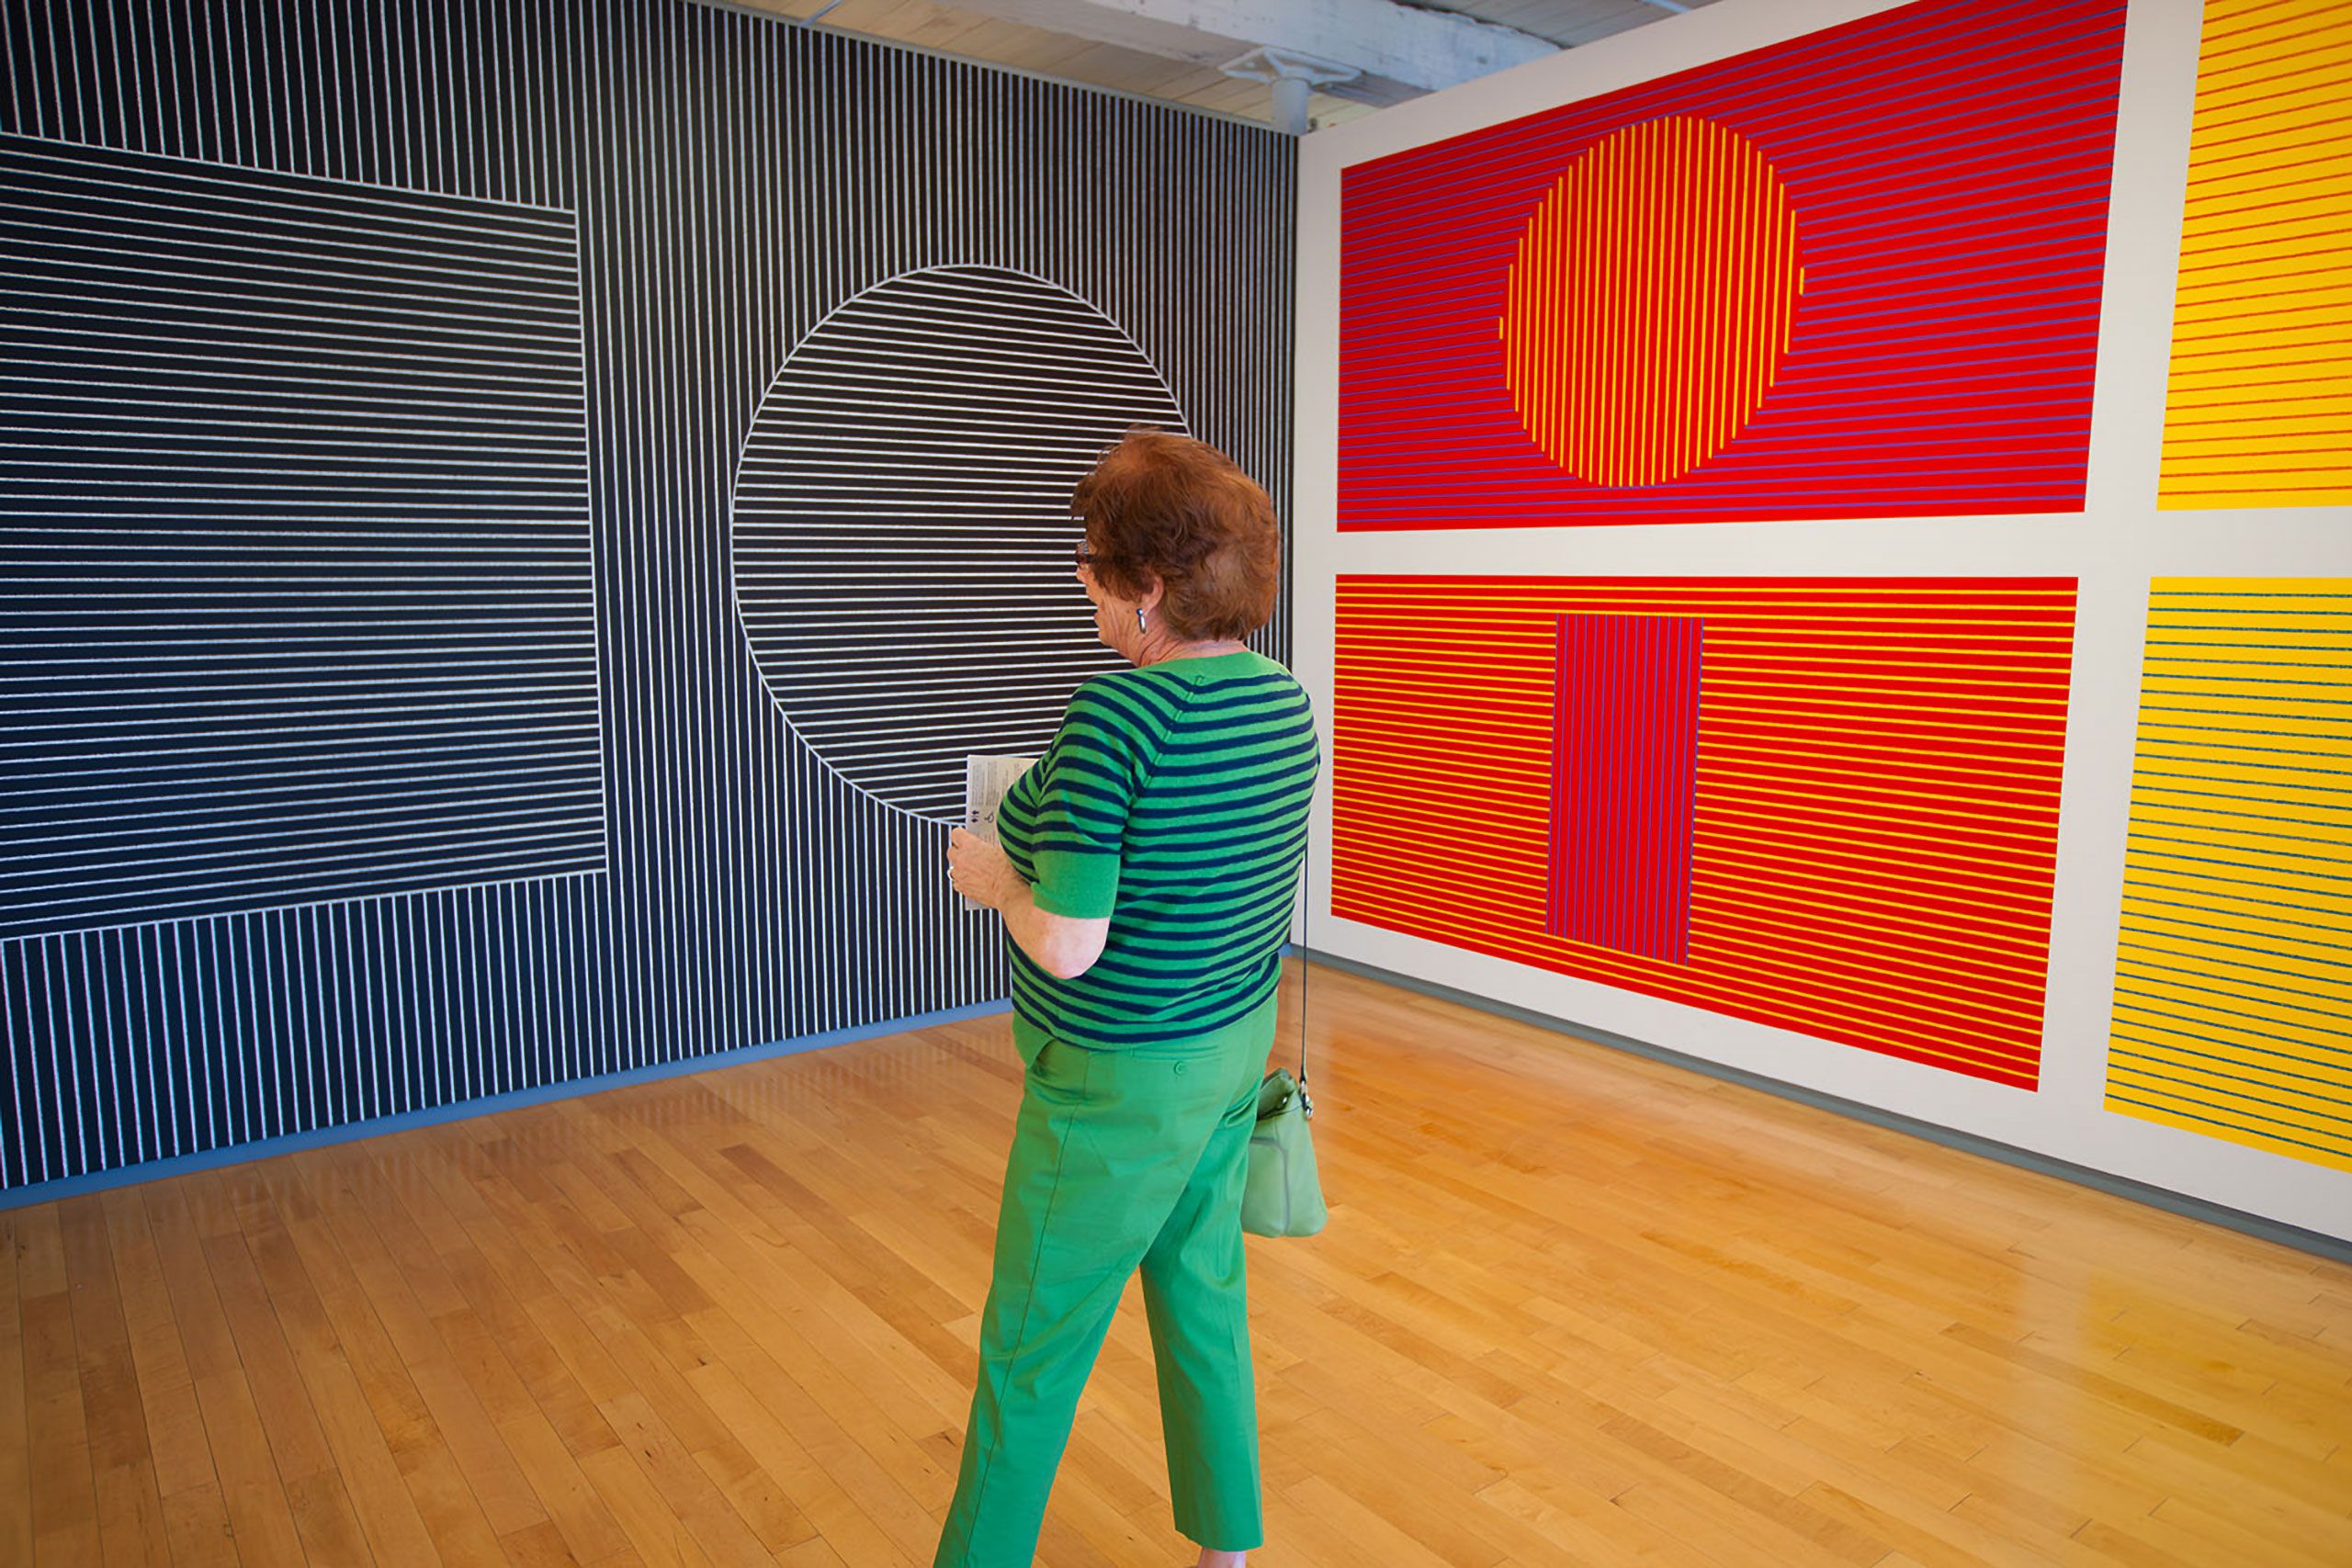 Sol LeWitt: A Wall Drawing Retrospective comprises 105 of LeWitt's large-scale wall drawings, spanning the artist's career from 1969 to 2007 mass moca